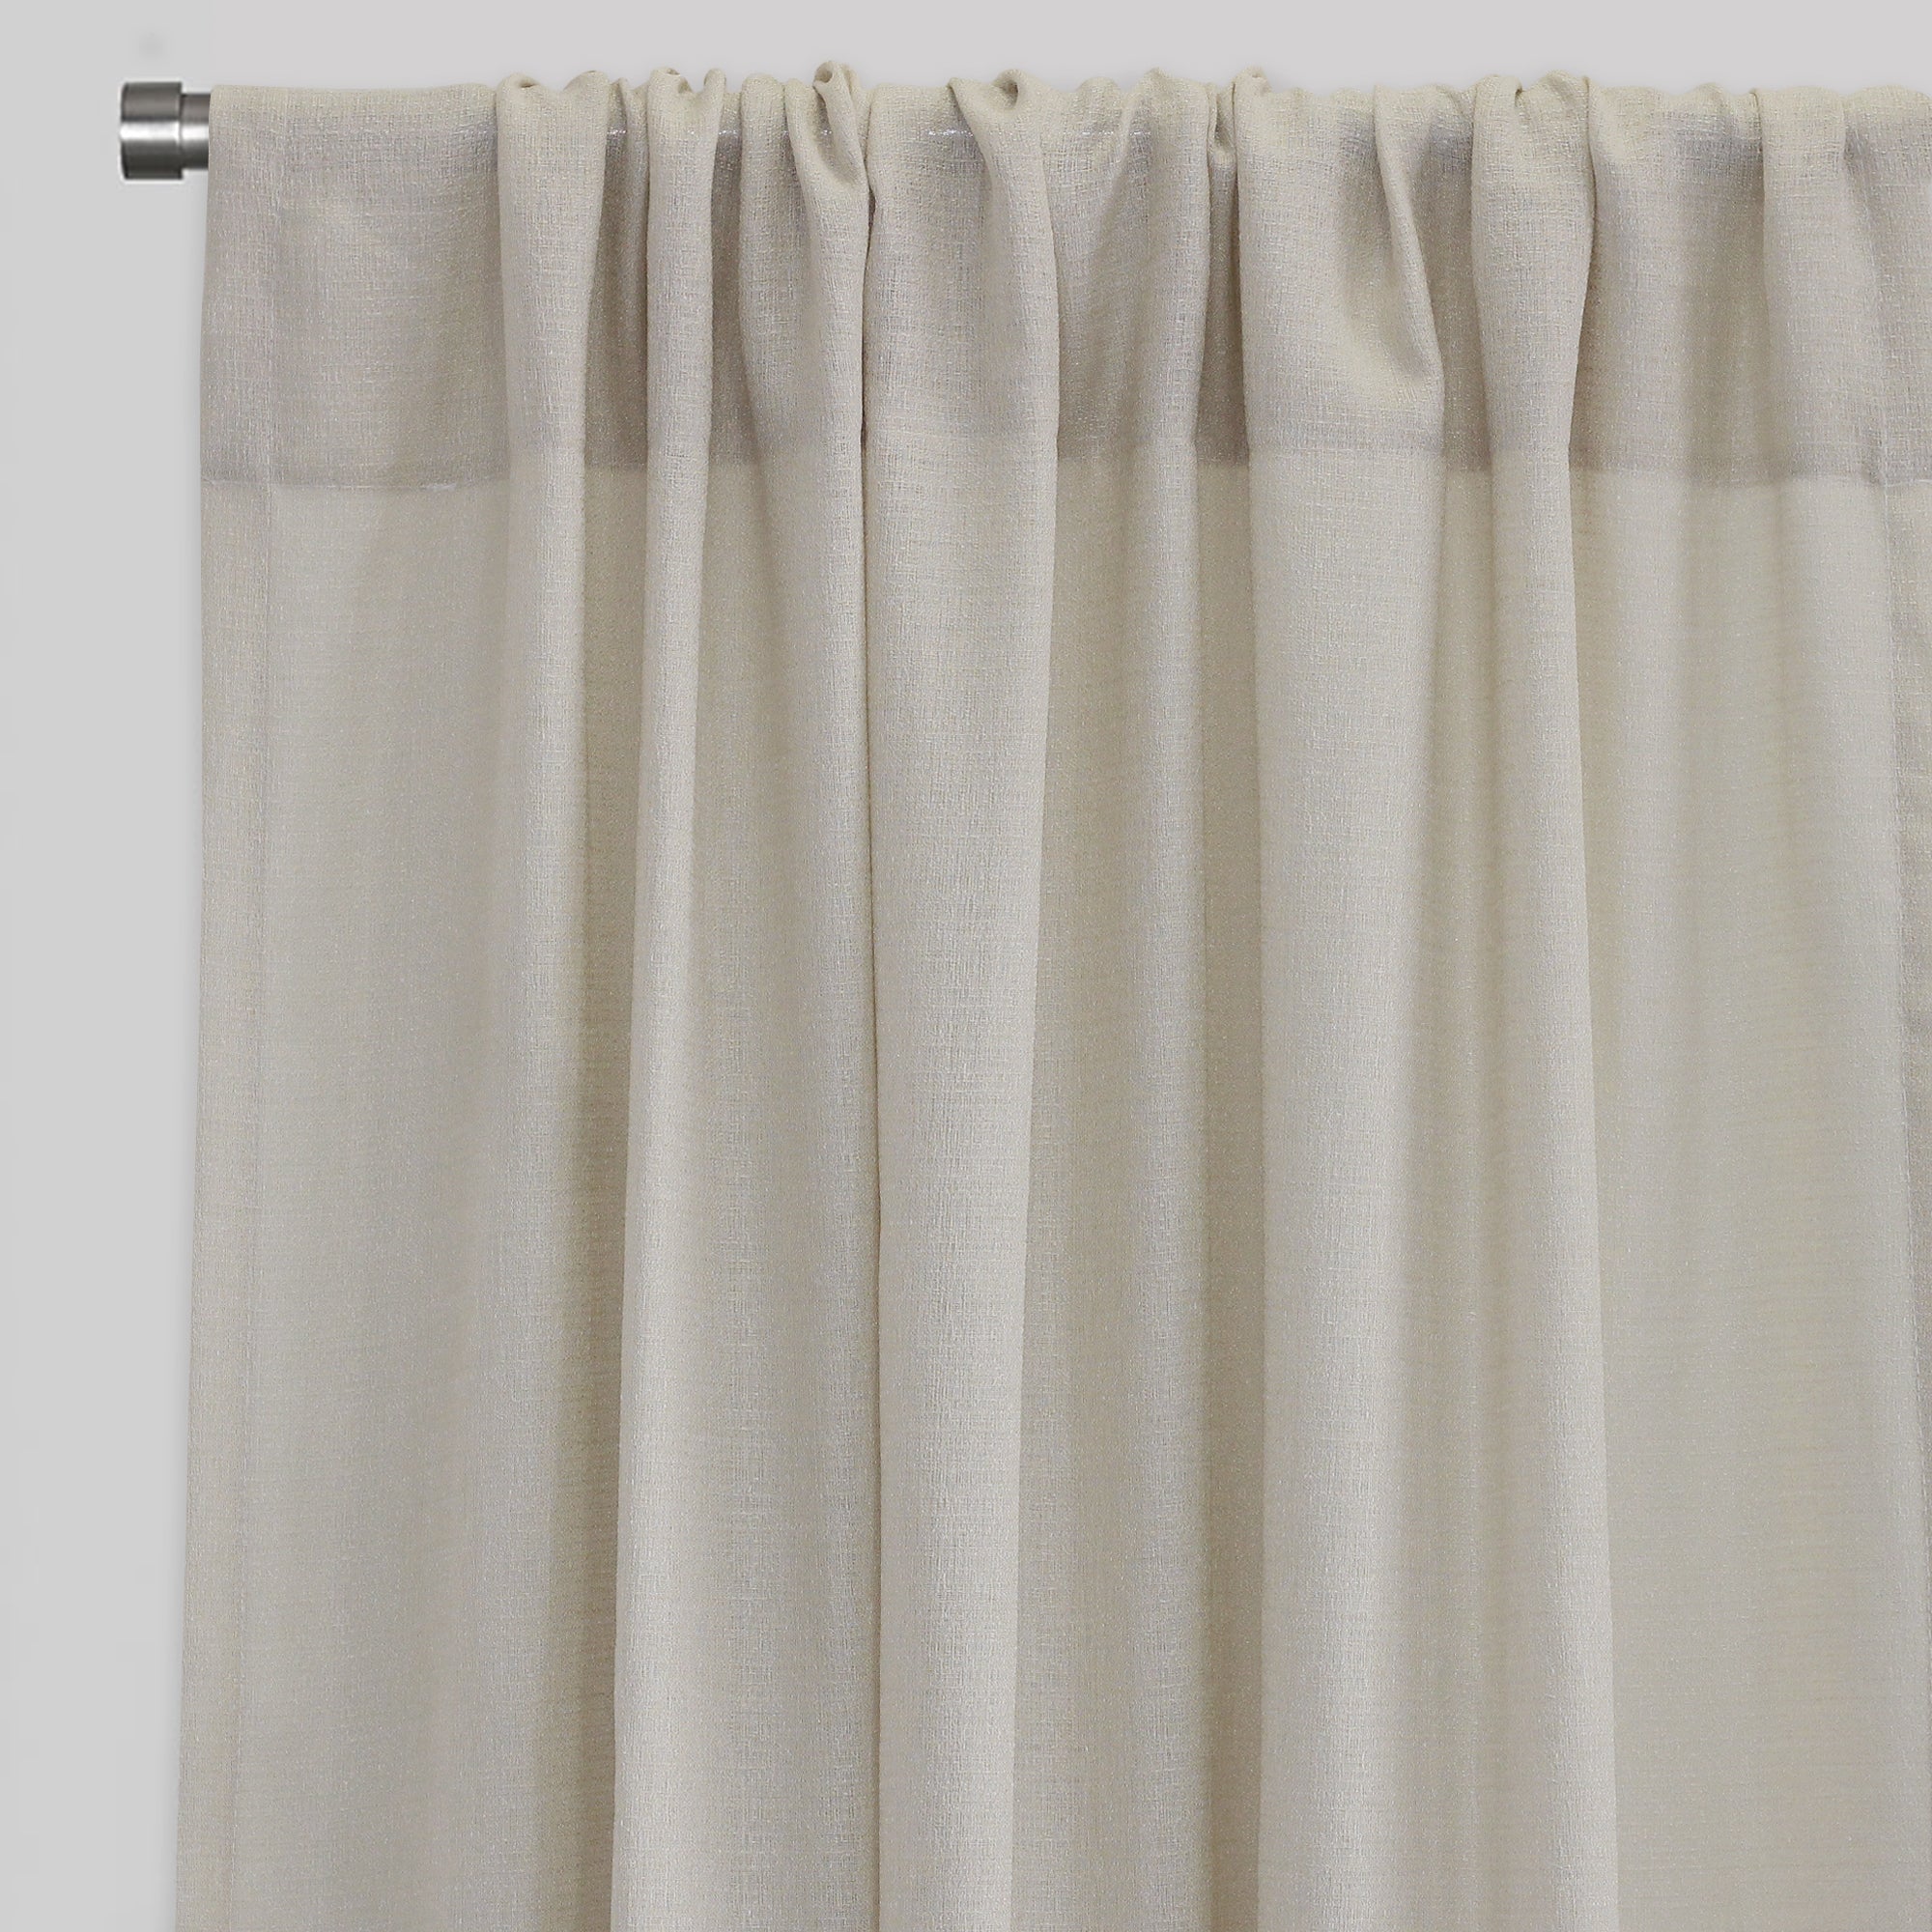 Moretti Curtain Panels | Solid Linen Look Sheer